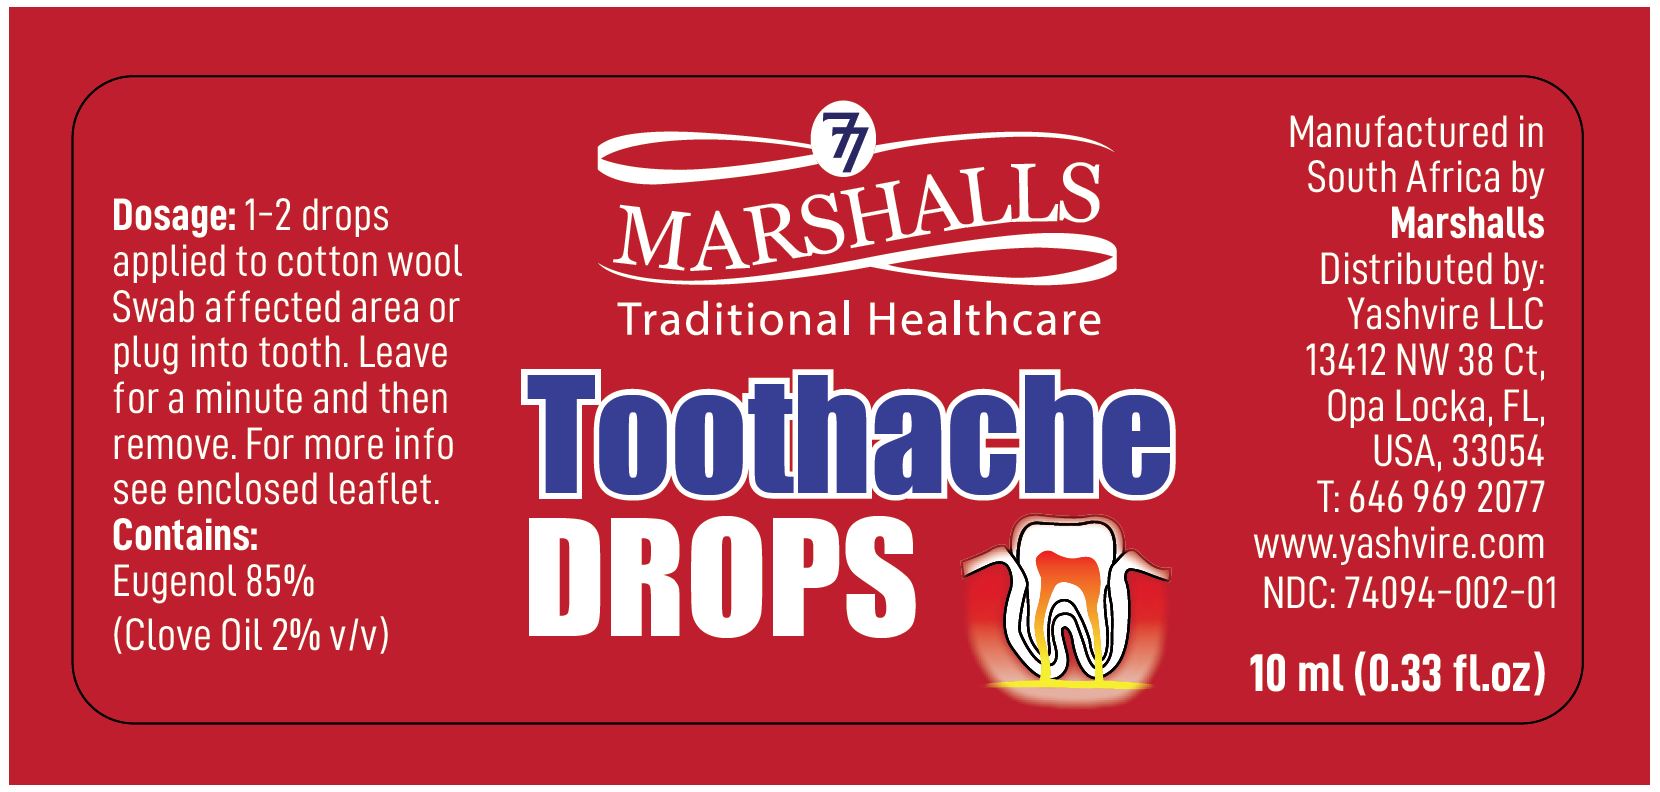 Marshall Toothache Drops - 10 ml (0.33 fl.oz) - NDC: <a href=/NDC/74094-002-01>74094-002-01</a> - Container